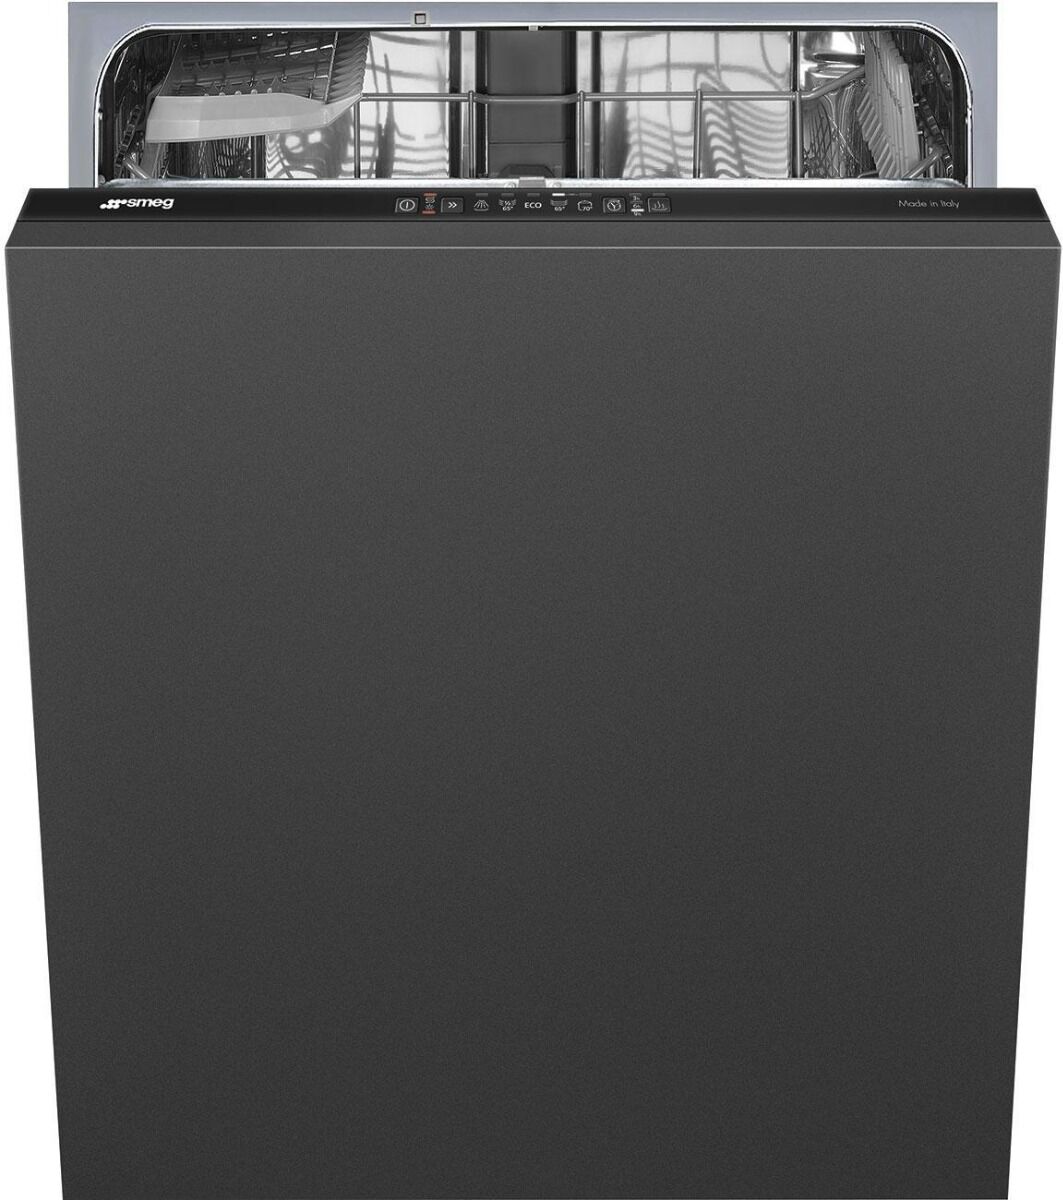 Smeg DI211DS 60cm Stainless Steel Fully Integrated Dishwasher - Stainless Steel